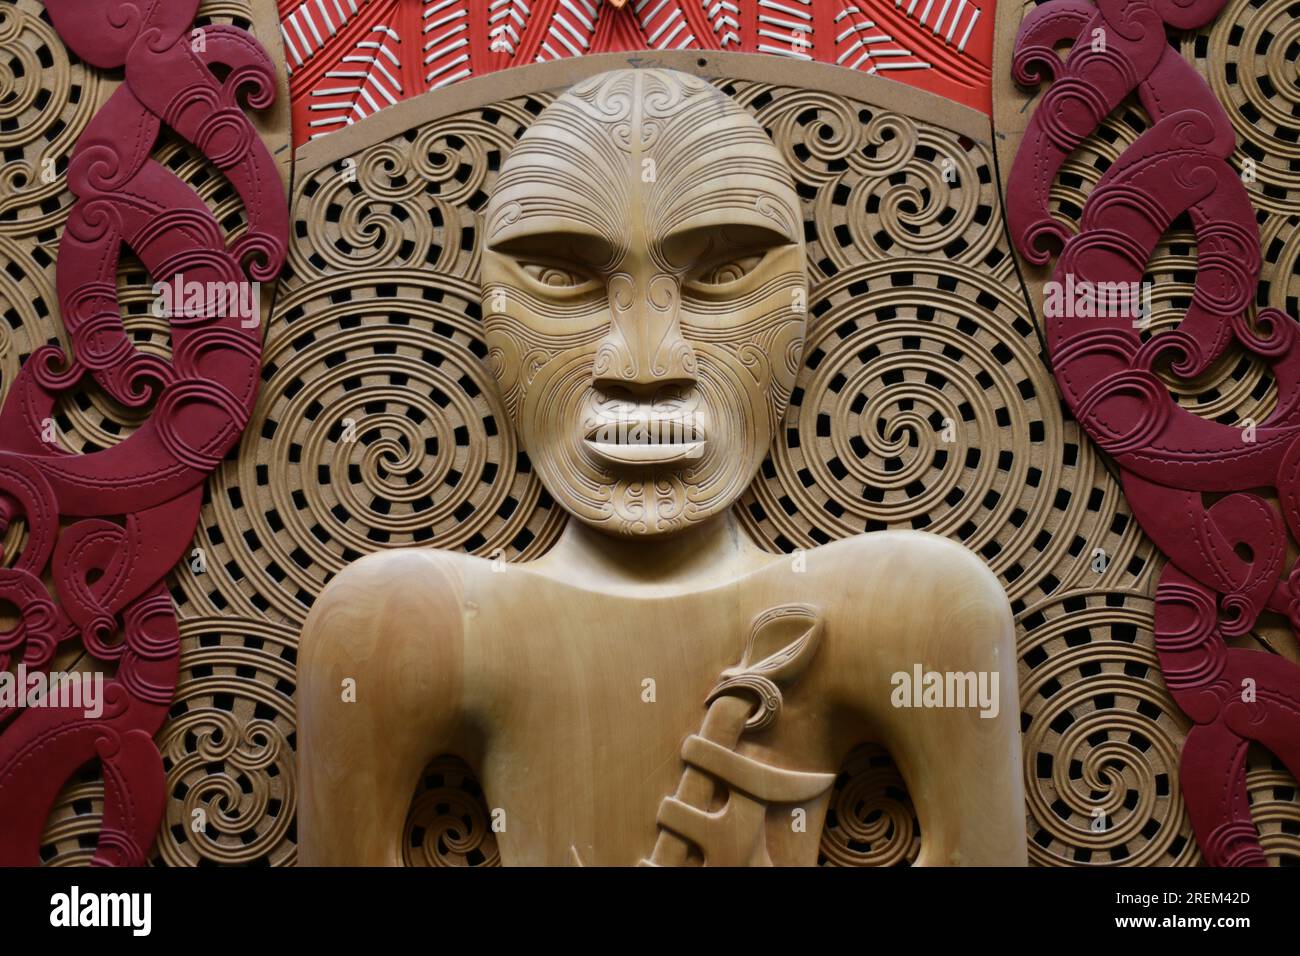 Maori style carvings on display at the National Library, Wellington, New Zealand Stock Photo